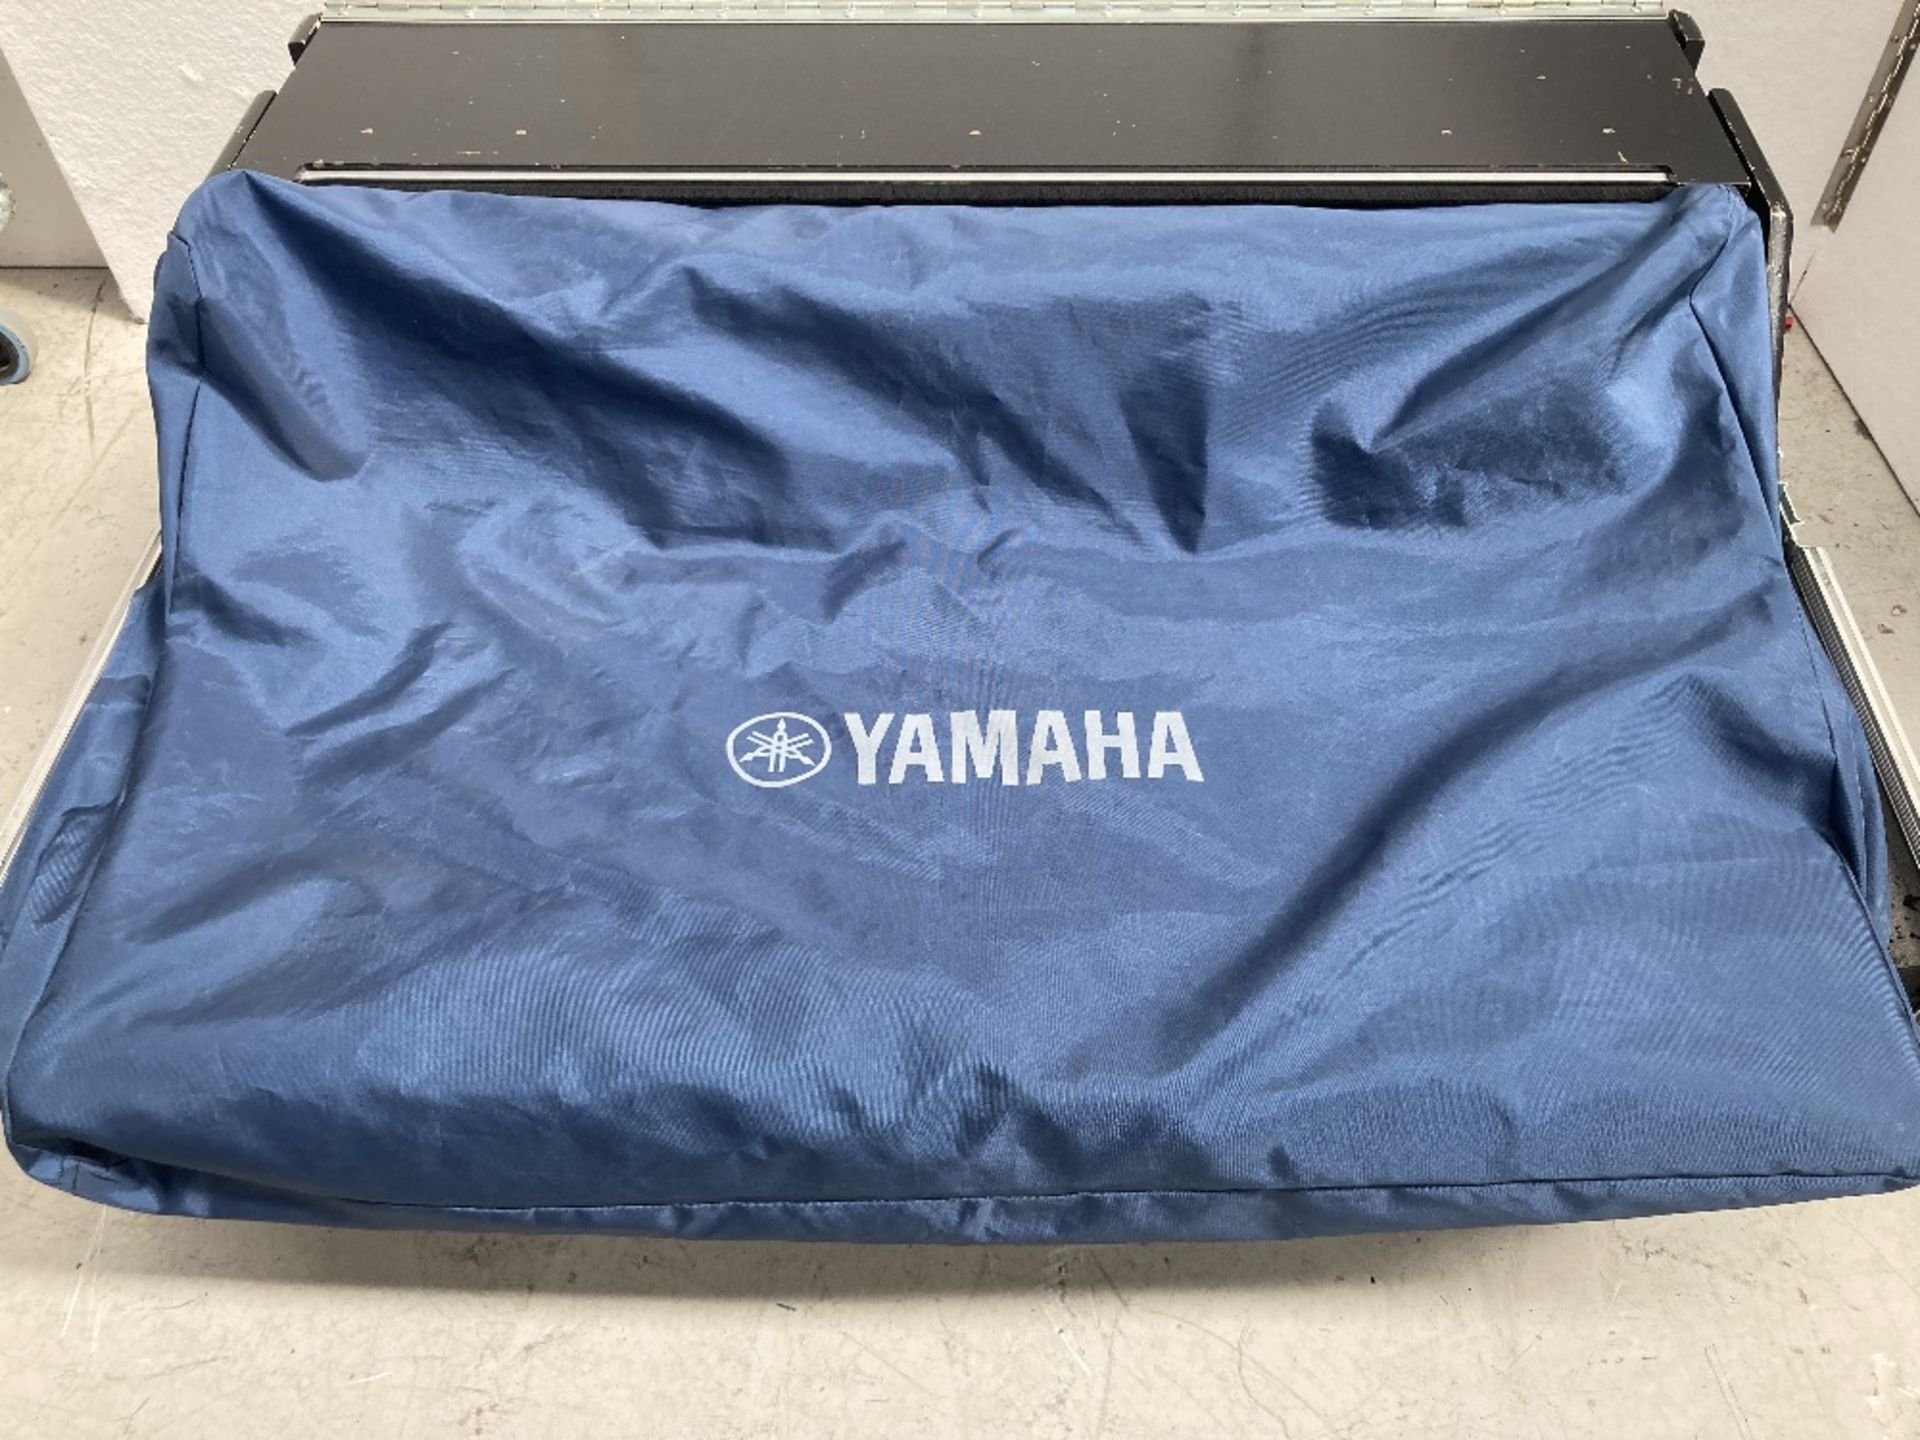 Yamaha CL5 Digital Mixing Console & Heavy Duty Mobile Flight Case - Image 12 of 14